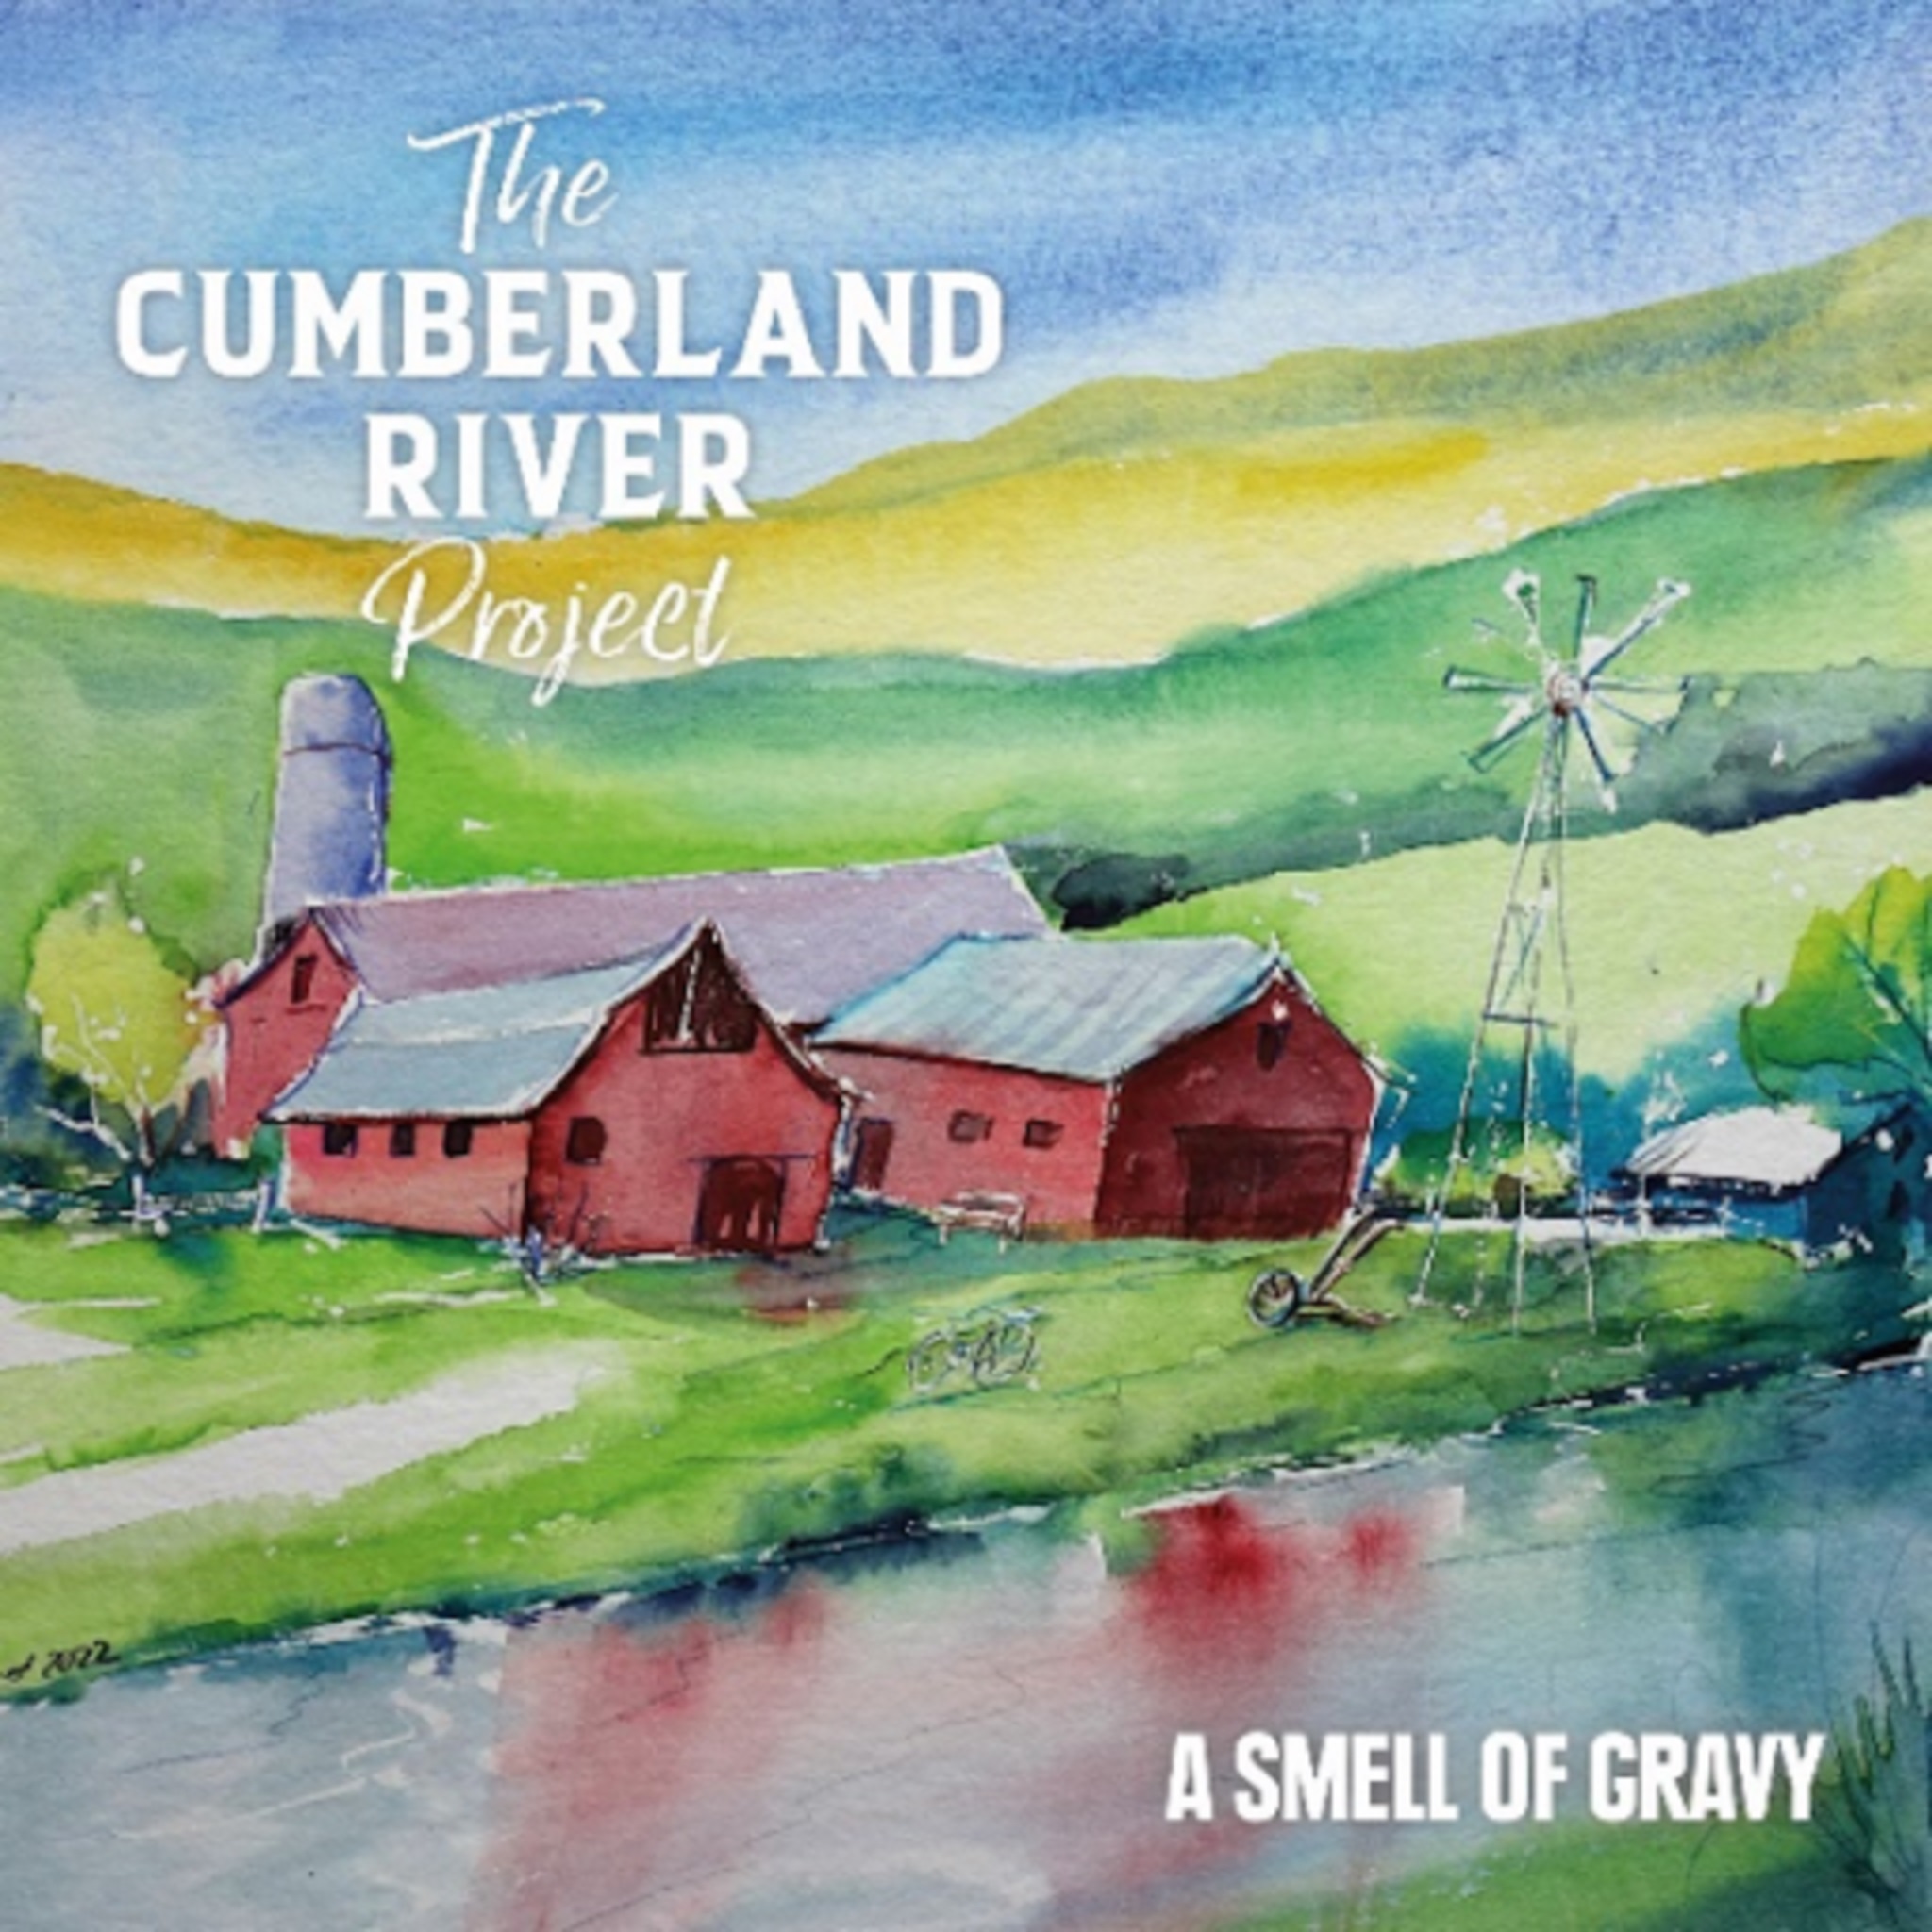 Frank Renfordt to release 'The Cumberland River Project' on June 24th